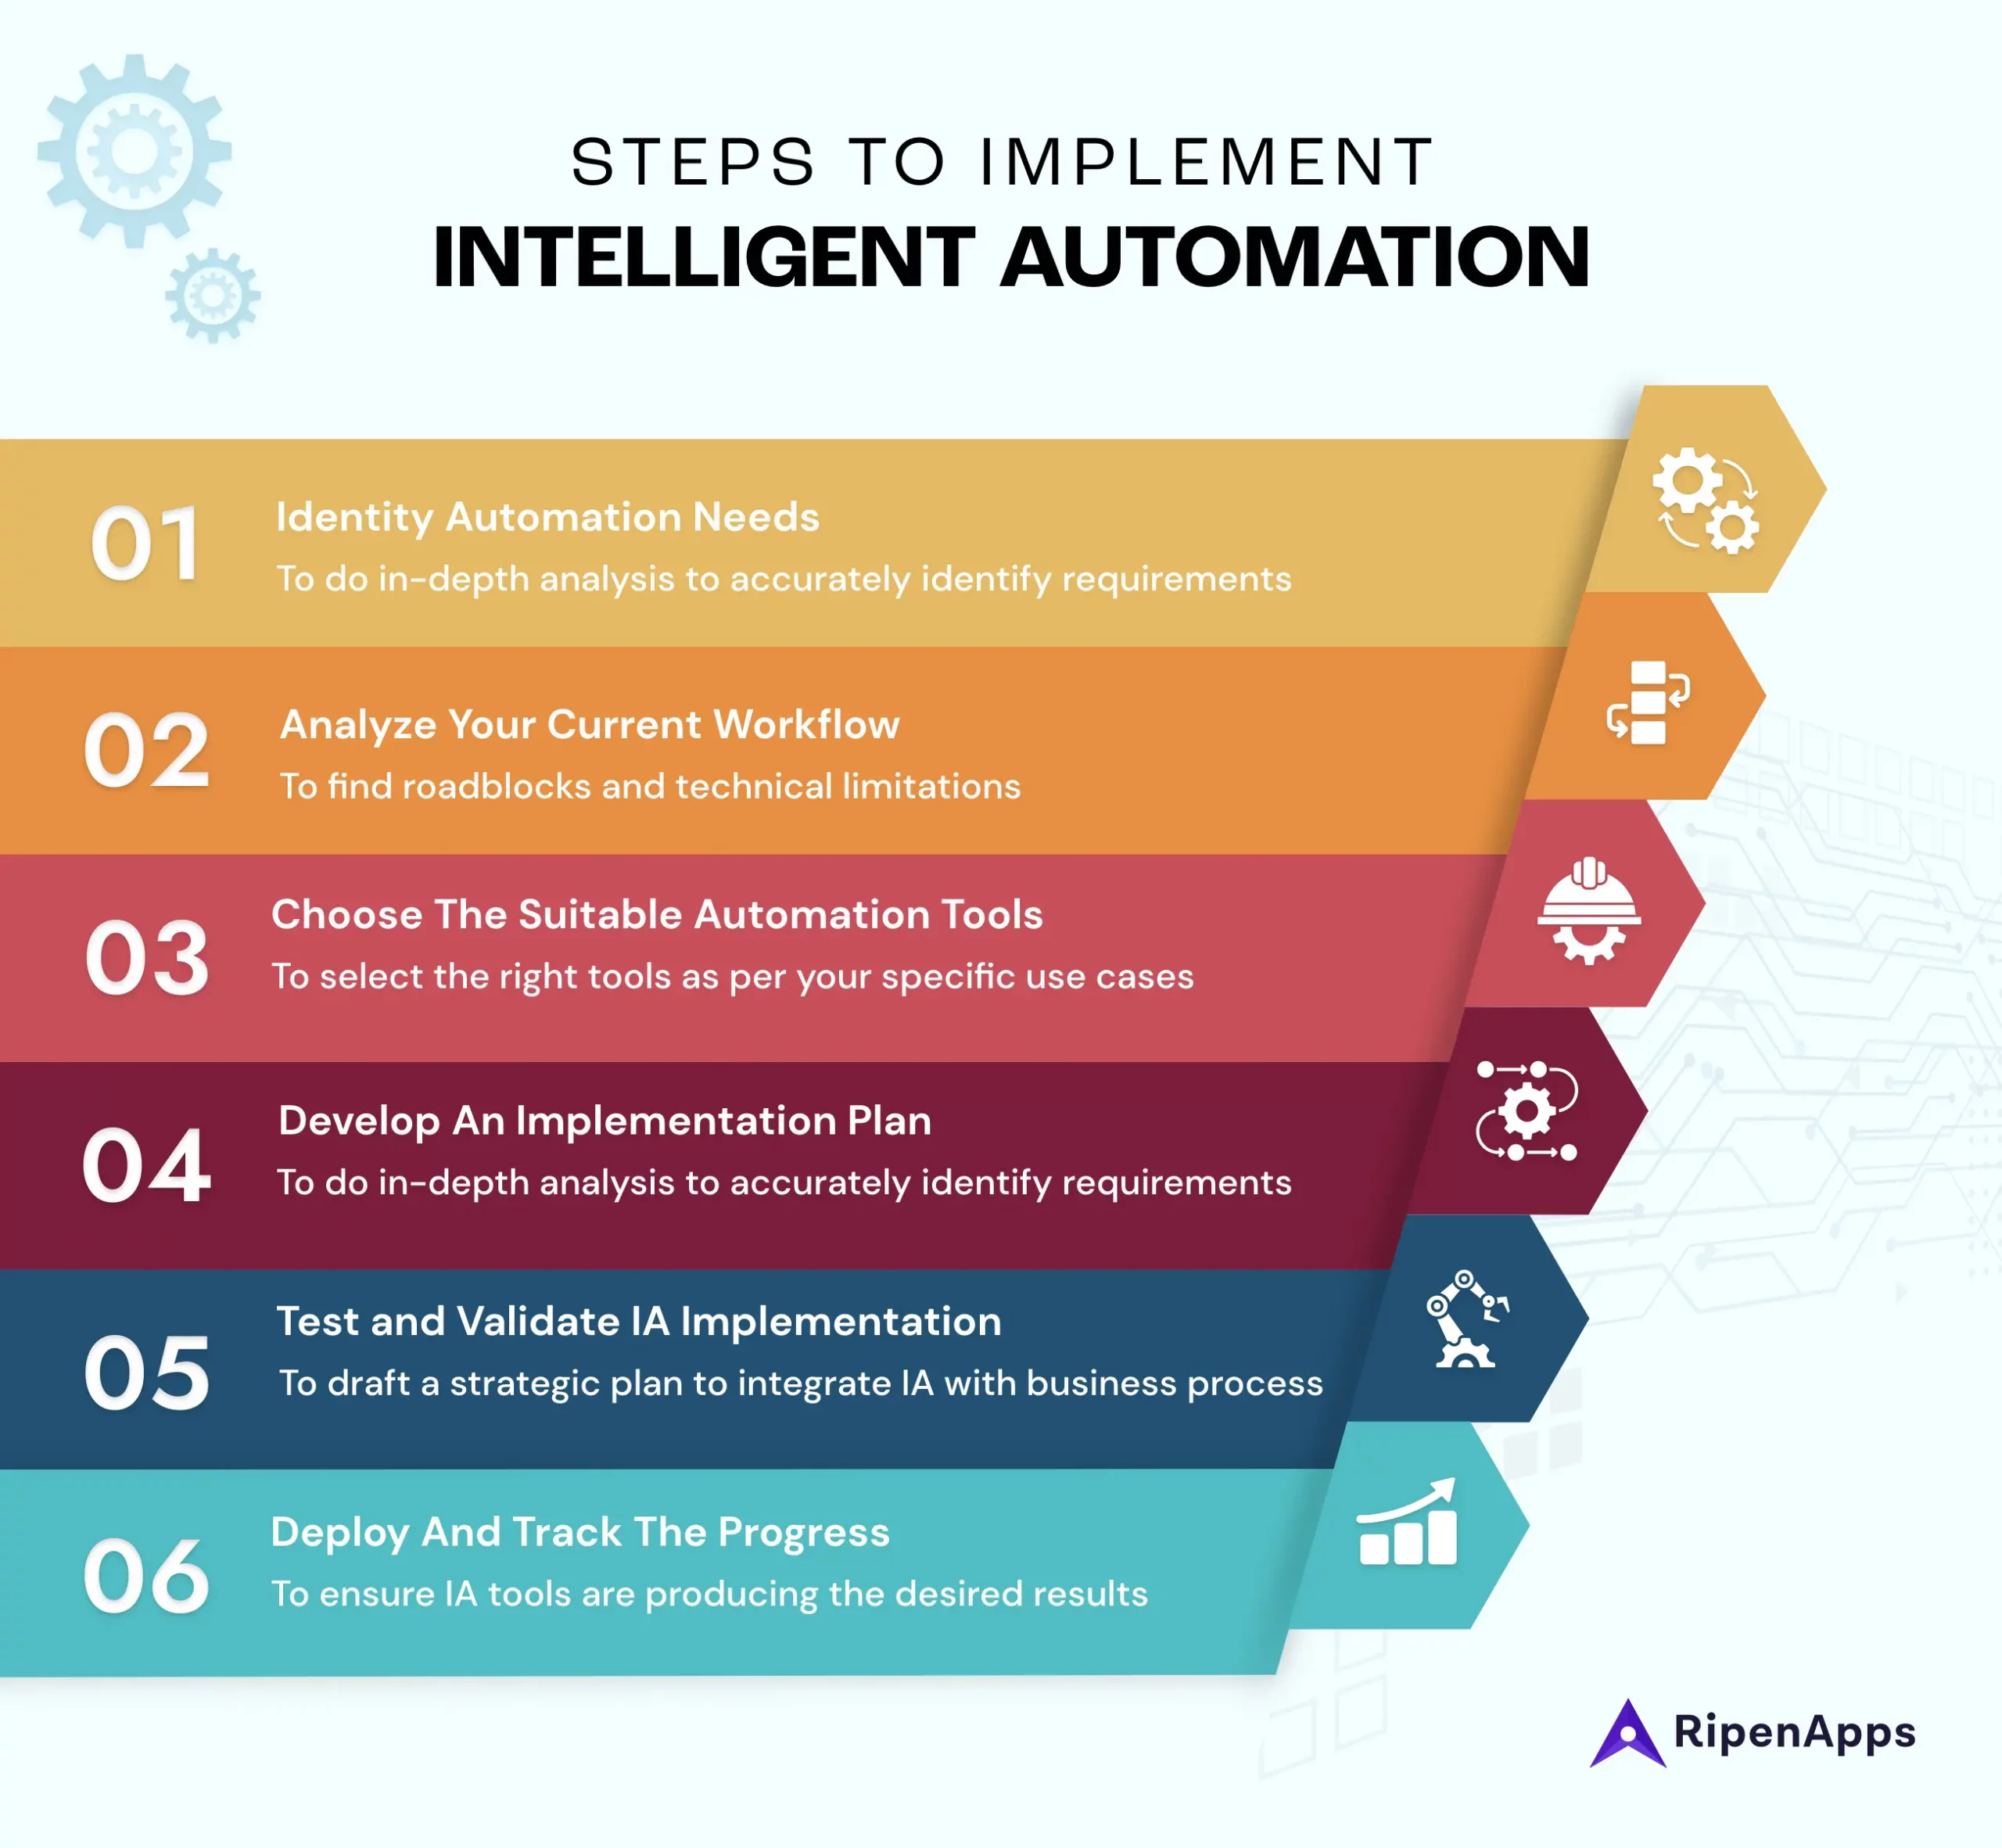 Steps to Implement Intelligent Automation